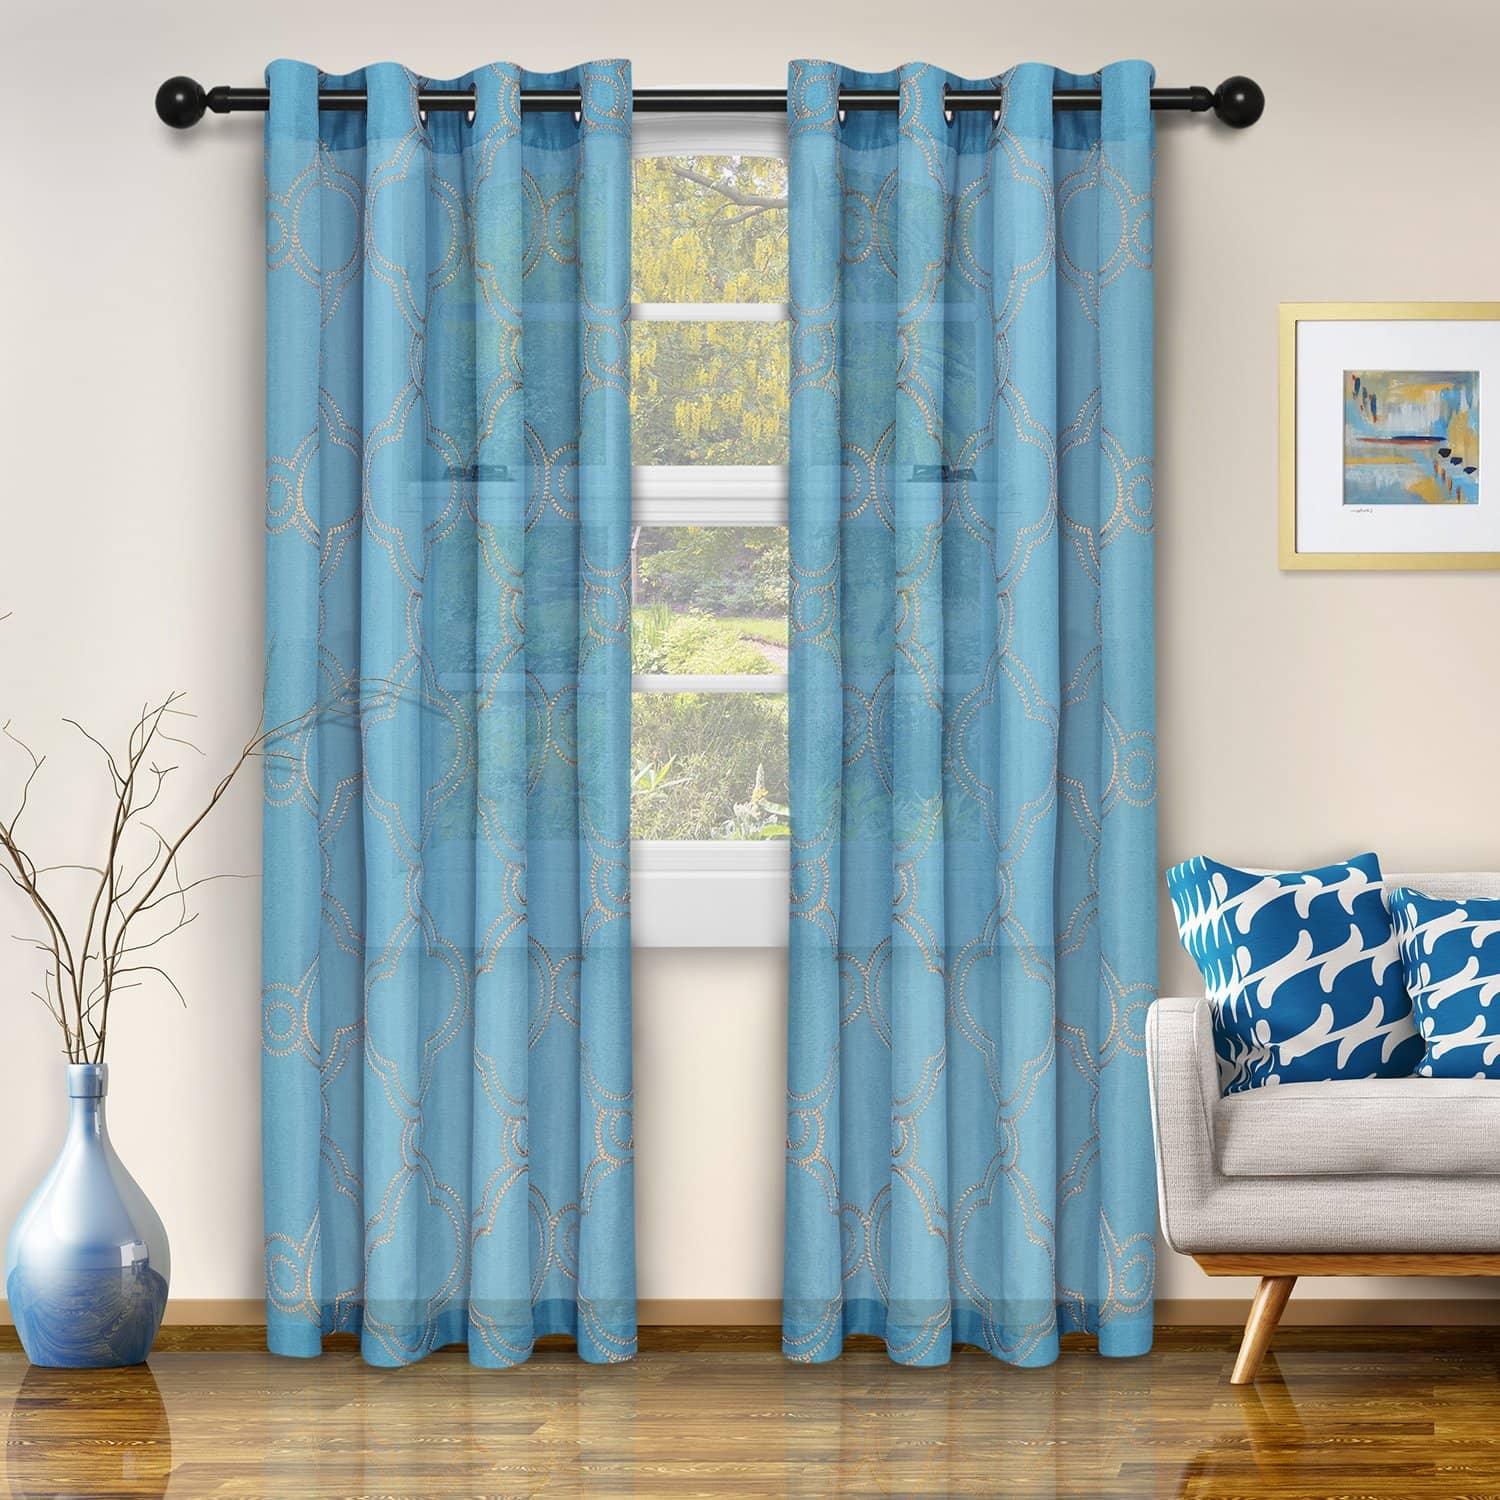 Are Semi-Sheer Curtains Right For You?